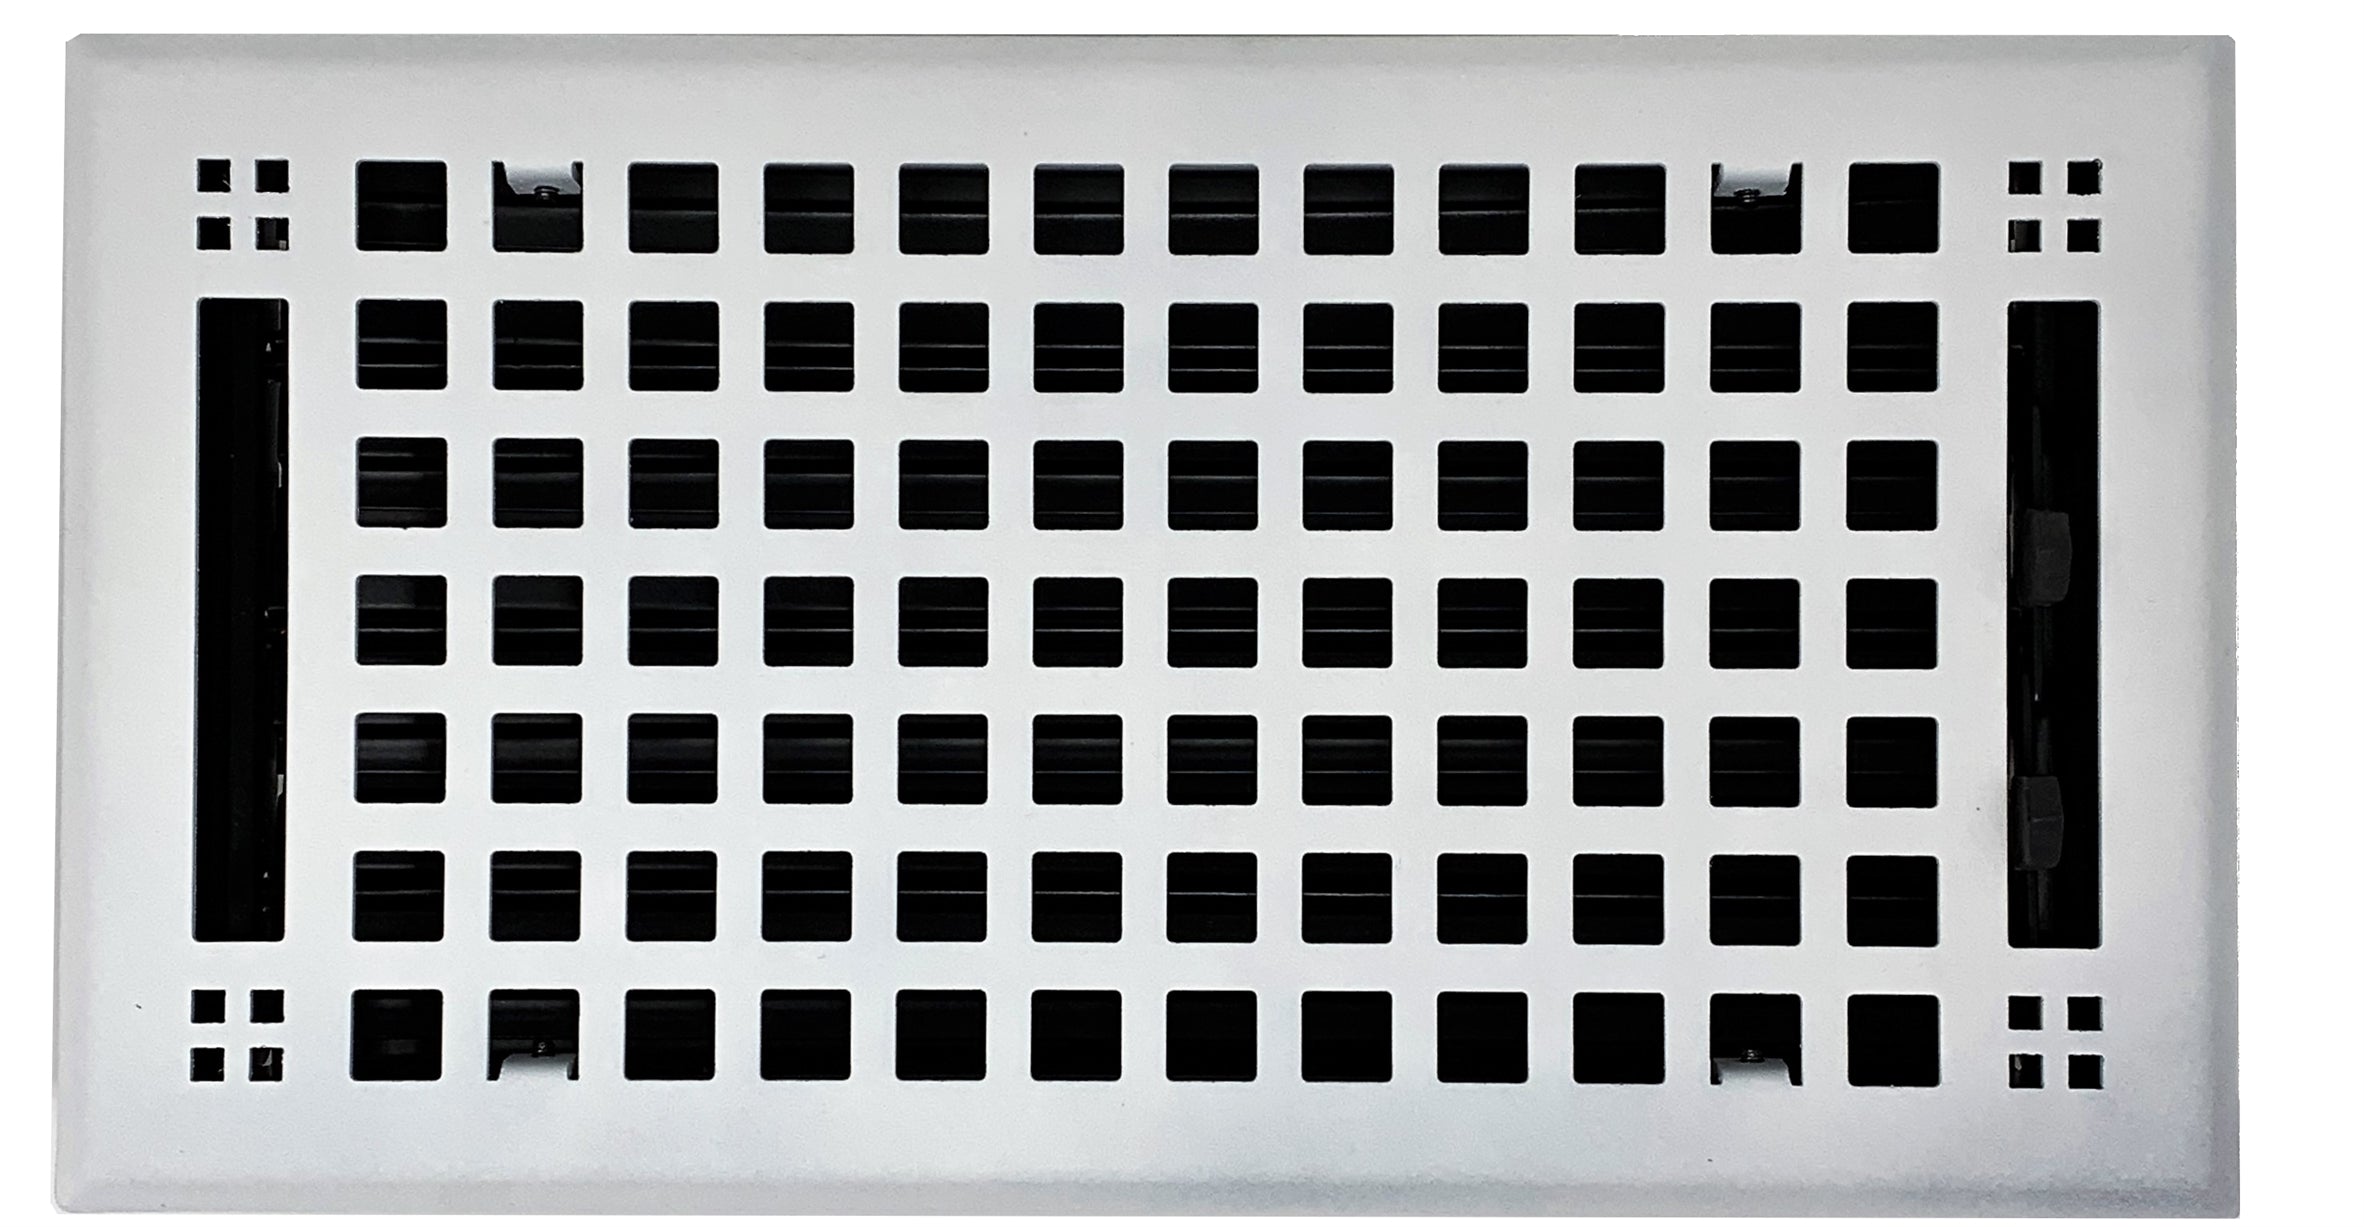 Steel Artisan Vent Covers - White